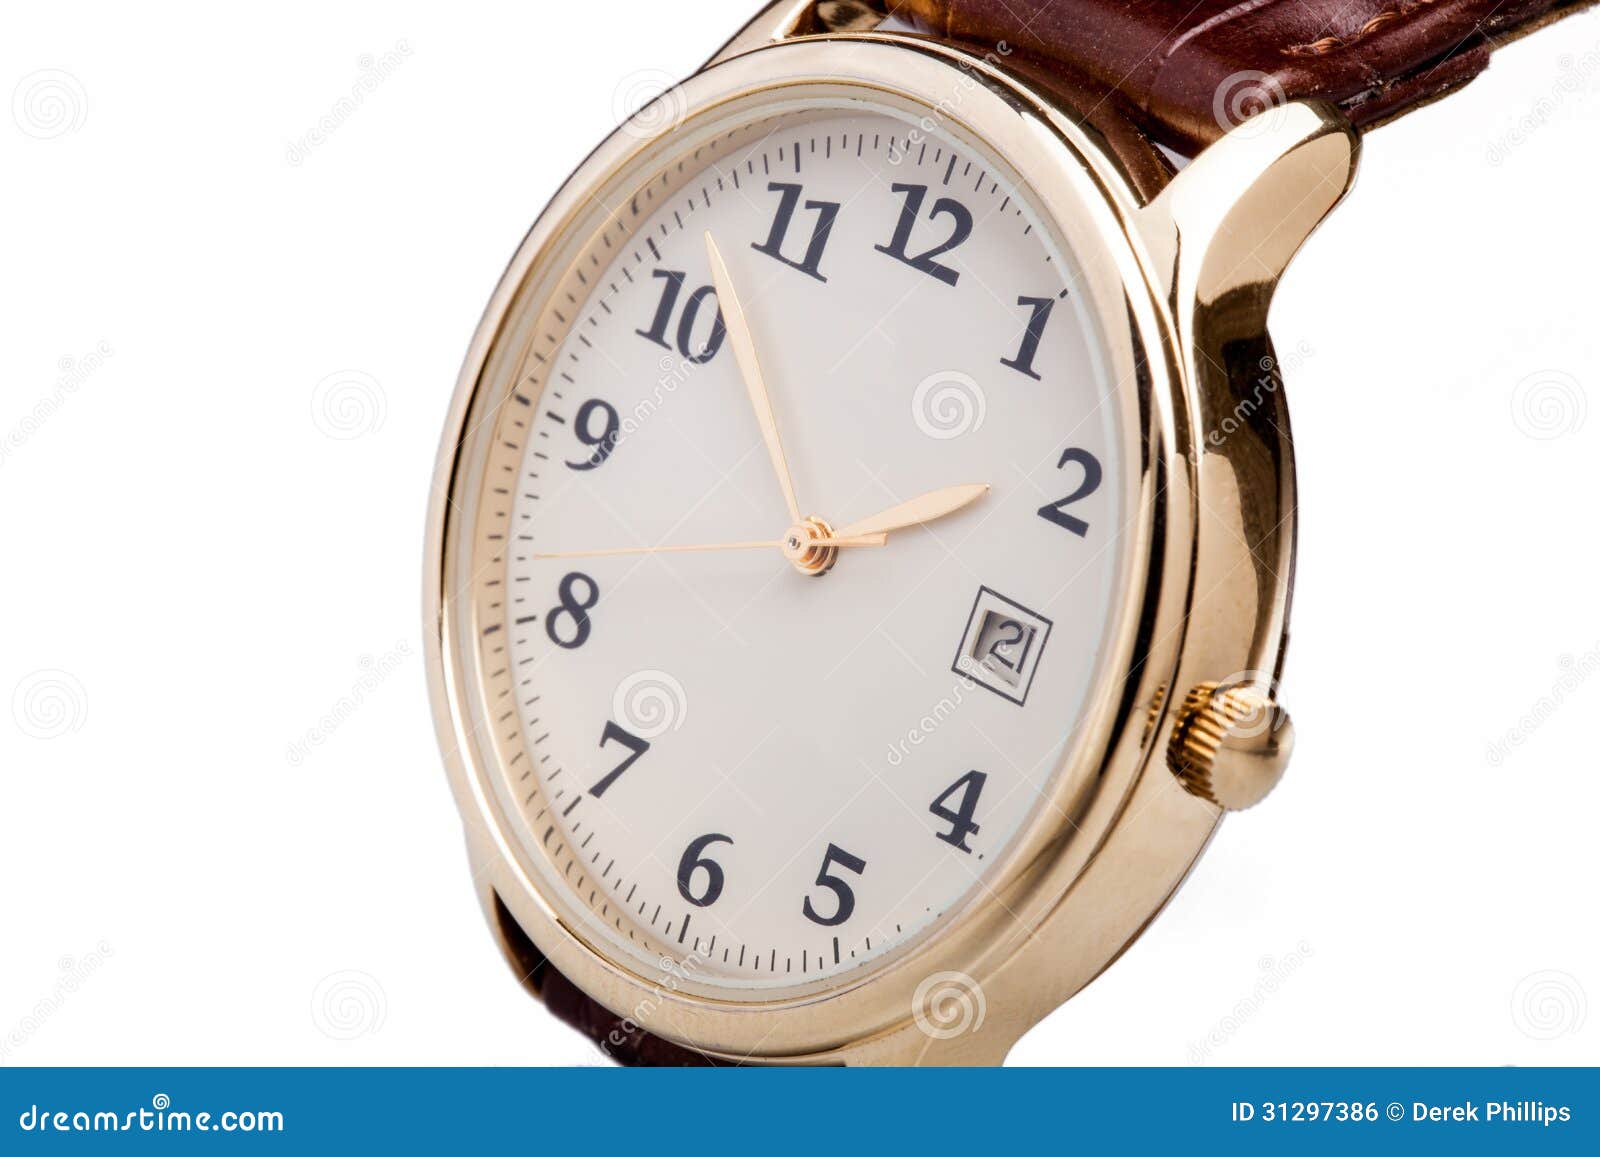 Gold Watch Leather Strap Royalty Free Stock Image - Image: 31297386